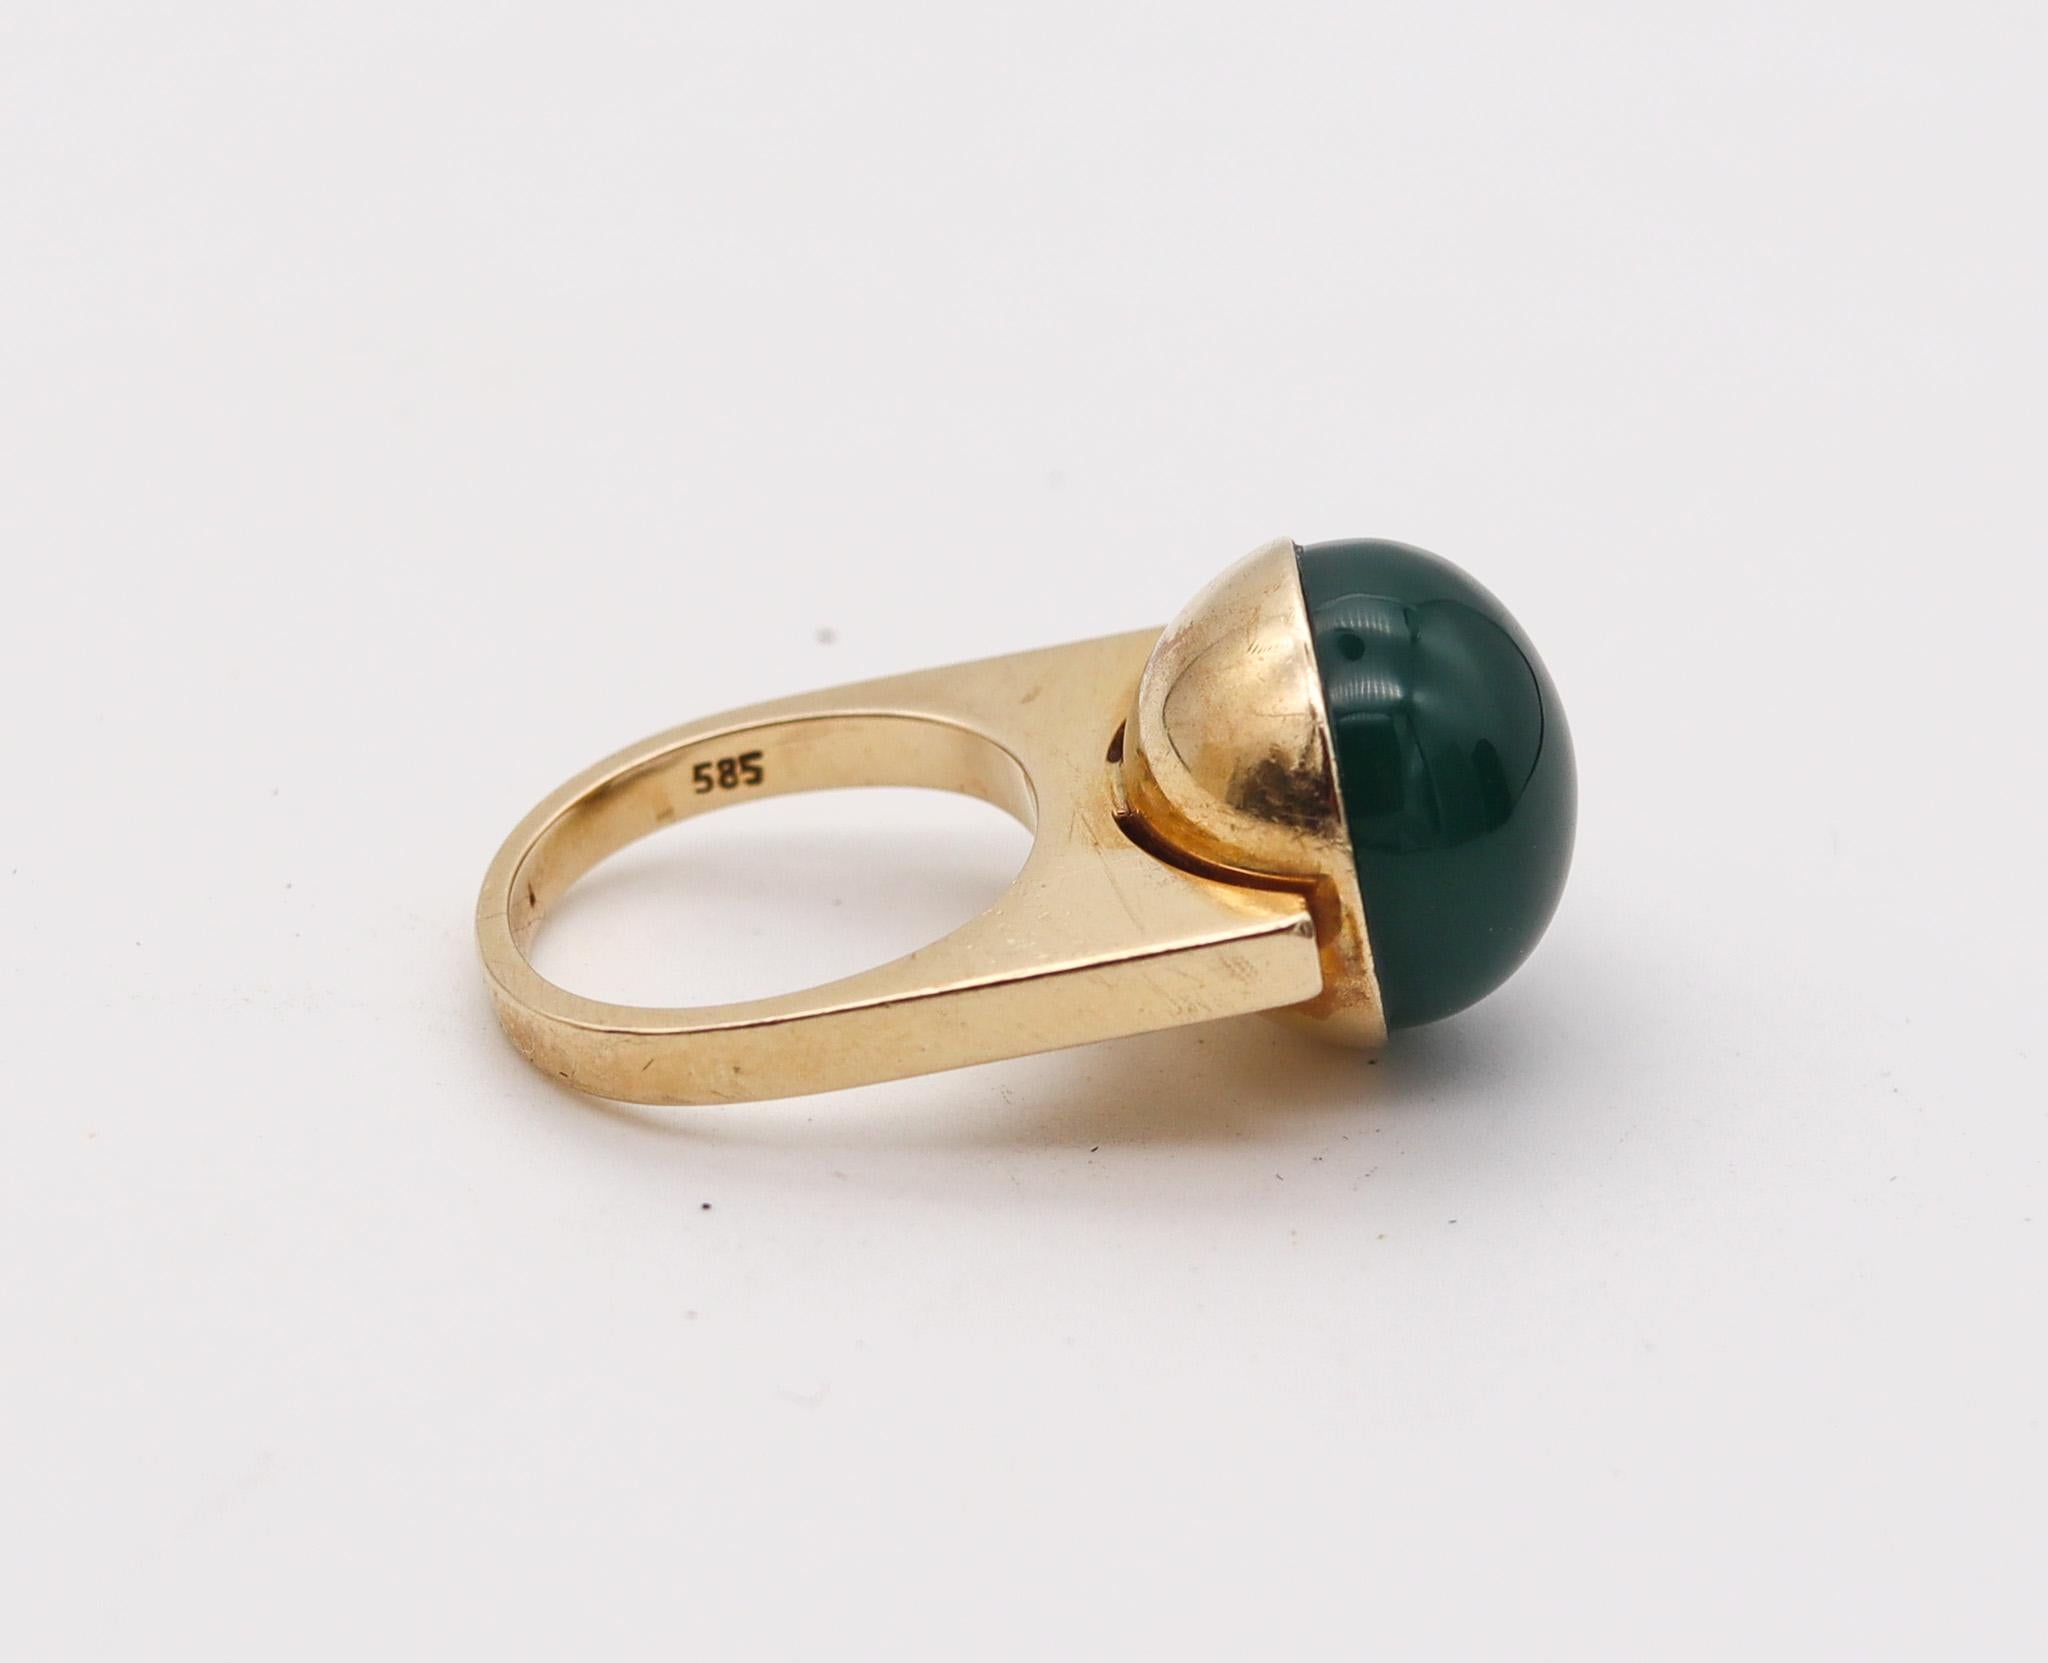 Sculptural geometric ring designed by Knud V. Andersen.

An sculptural ring, created in Copenhagen Denmark by the artist goldsmith Knud V. Andersen, back in the 1970. Crafted with geometric sculptural patterns in solid yellow gold of 14 karats with